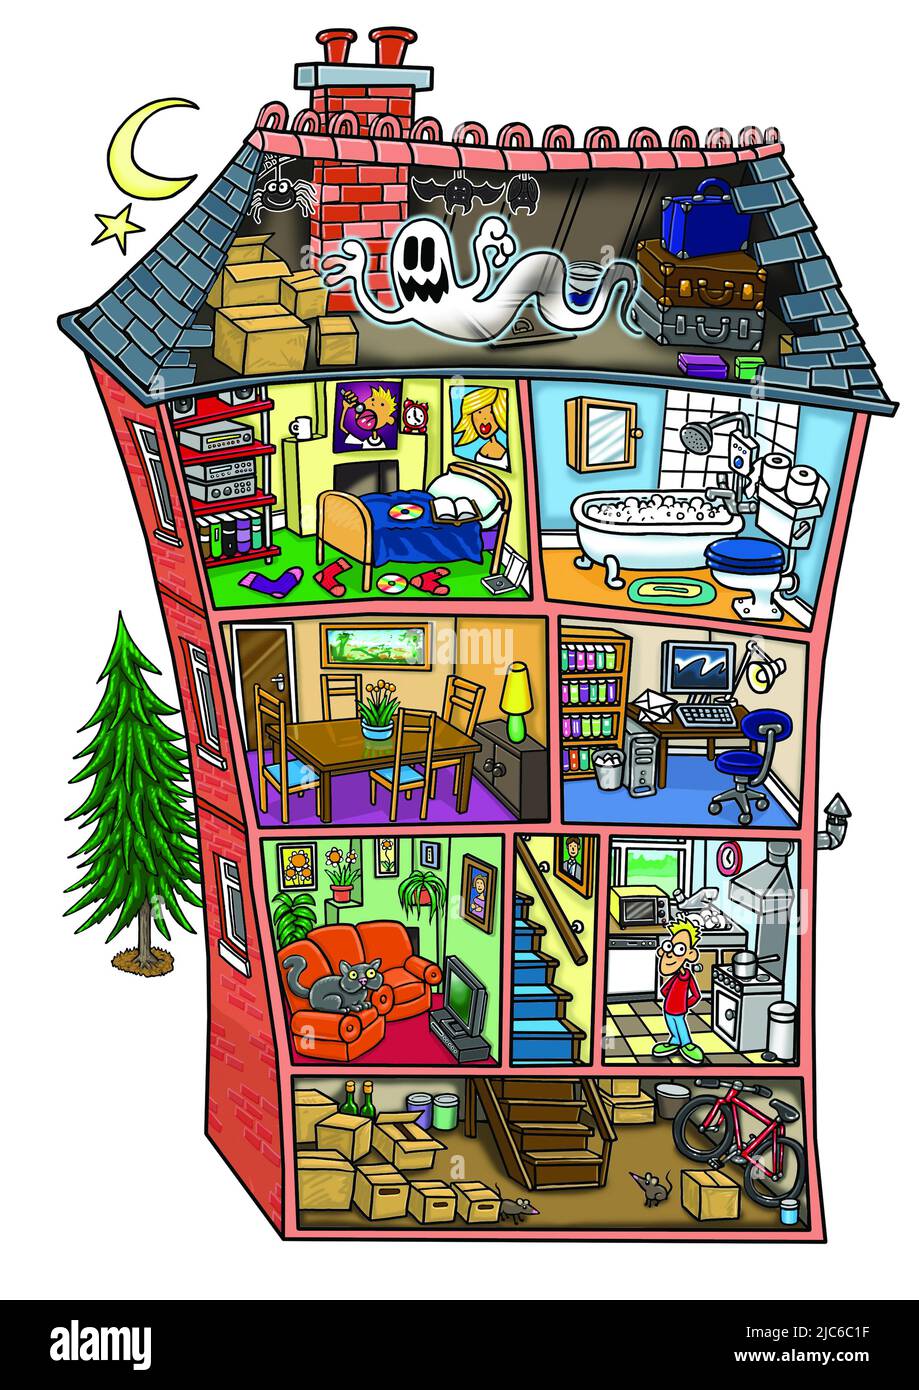 Fun exploded diagram style art showing the layers of a house, with basement, living rooms, bedrooms, bathrooms, kitchen and spooky attic with ghost! Stock Photo